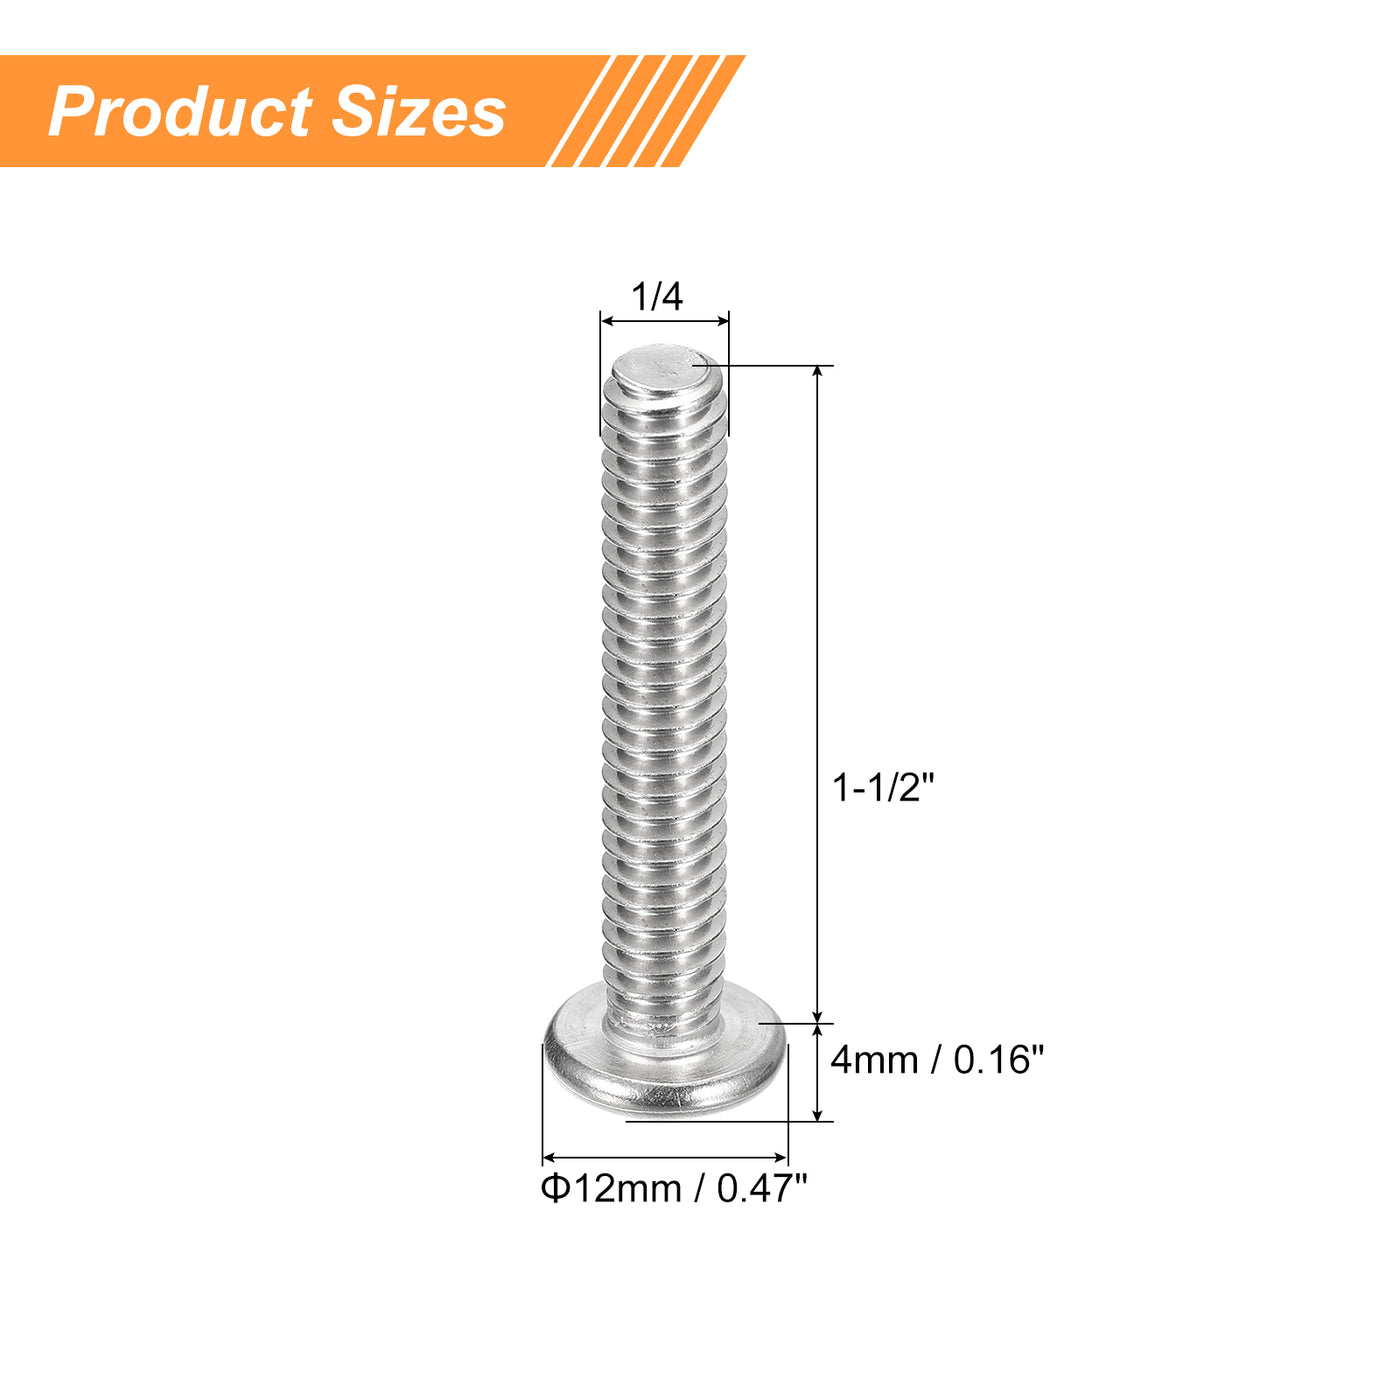 uxcell Uxcell 1/4-20x1-1/2" Pan Head Machine Screws, Stainless Steel 18-8 Screw, Pack of 10